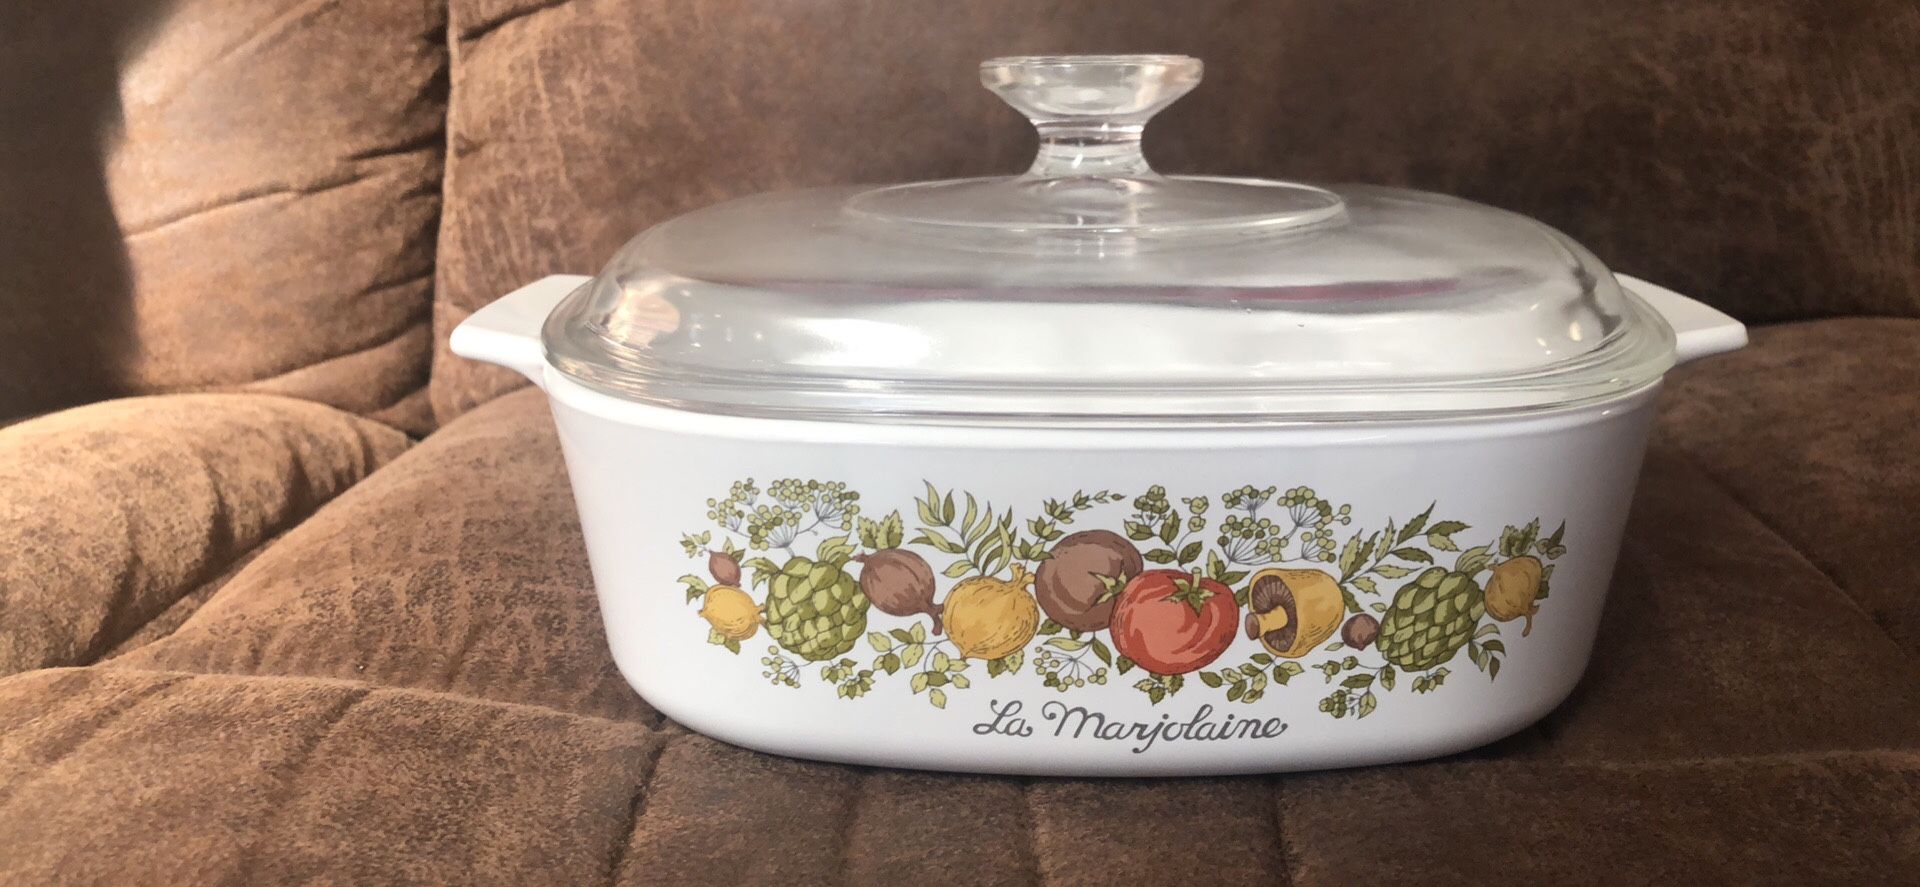 Corning Ware spice of life casserole dish with lid